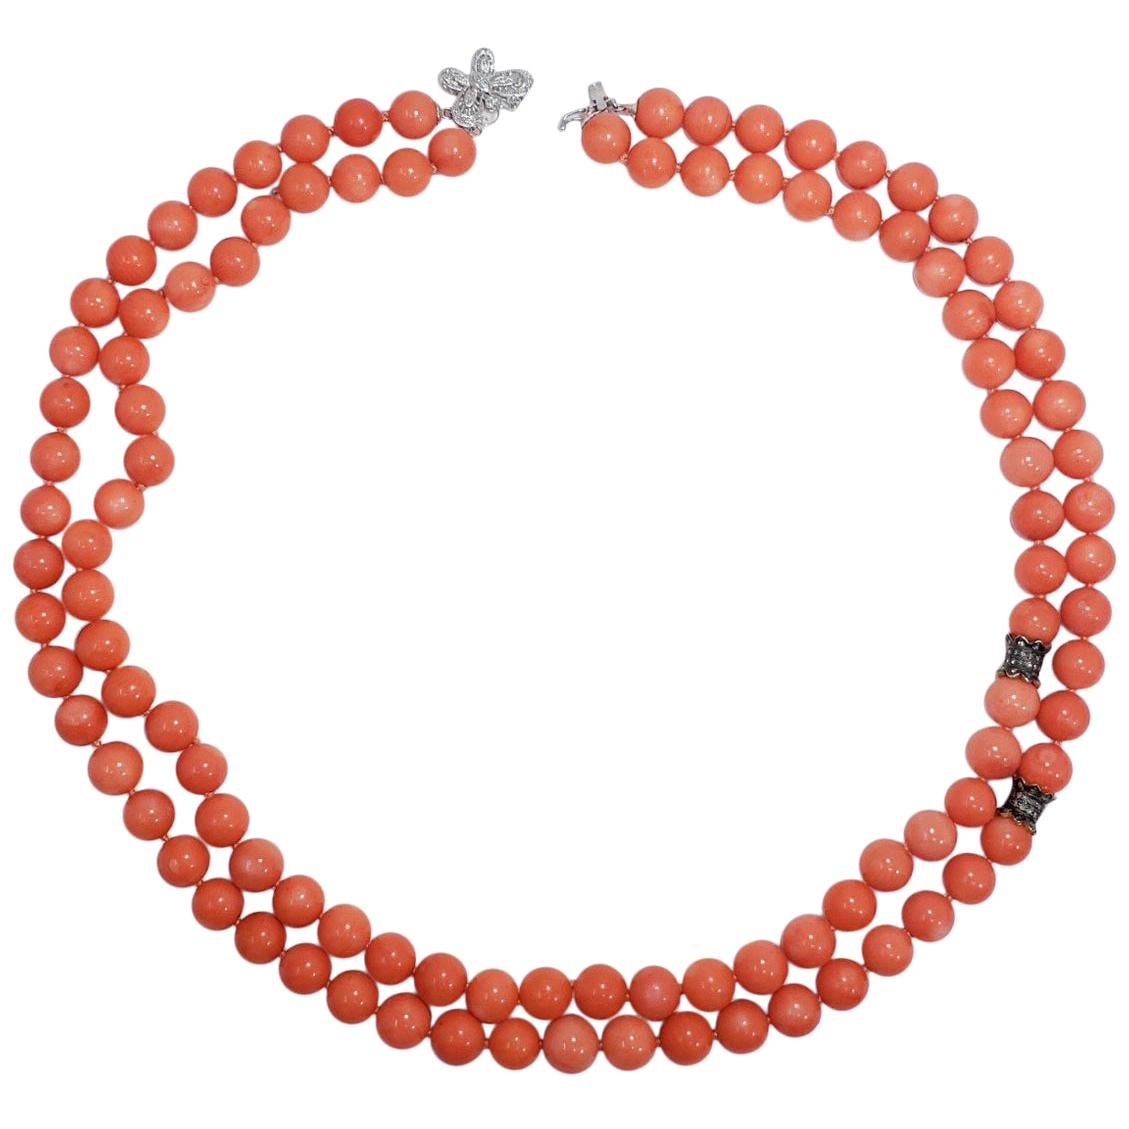 Genuine Salmon Coral Bead and Diamond Knotted String Double-Strand Gold Necklace